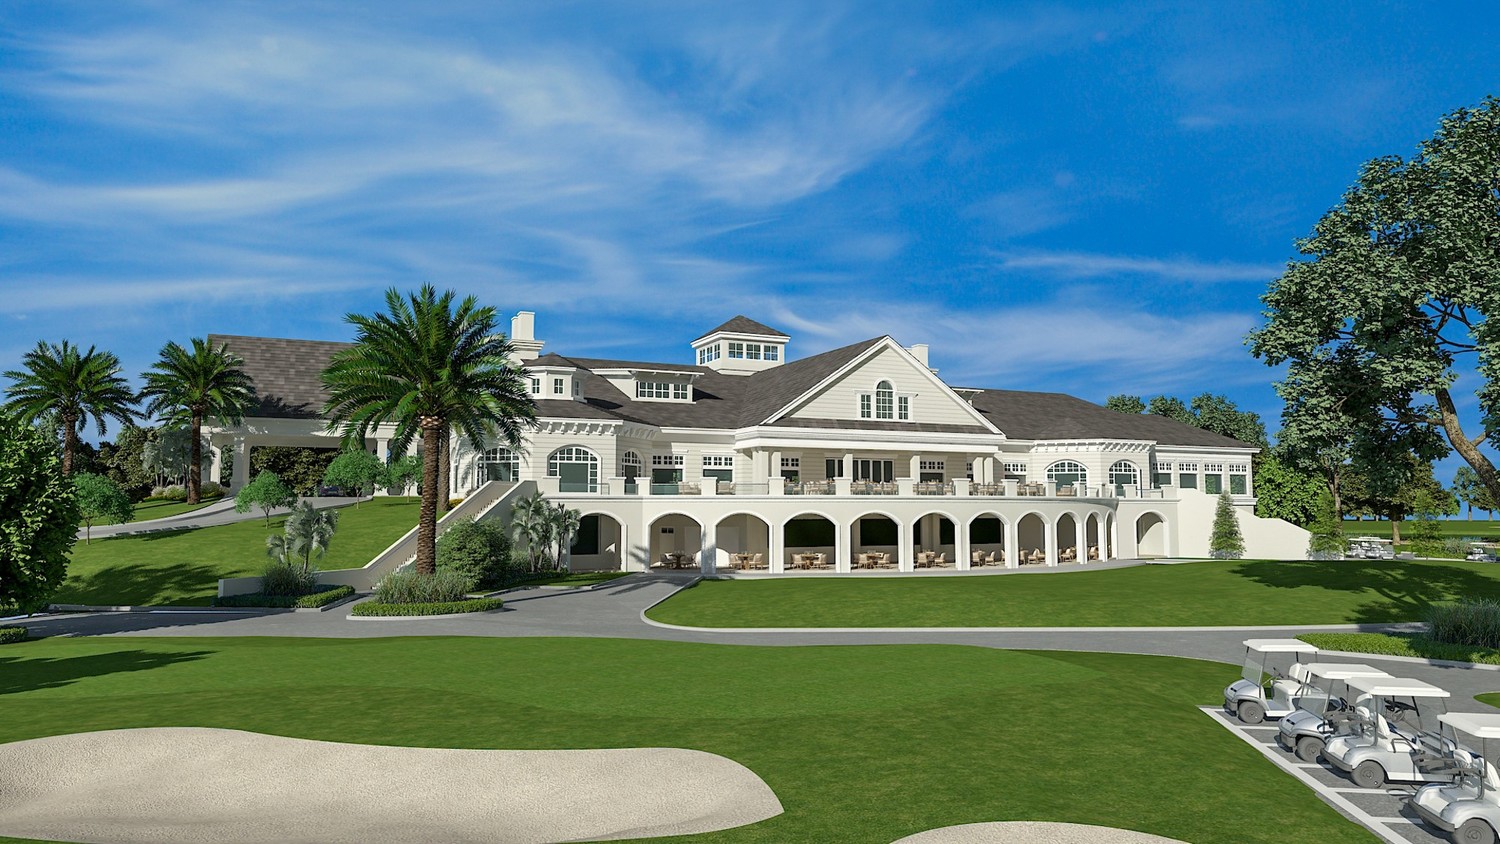 The new members’ clubhouse is projected to be two stories and approximately 32,000 to 33,000 square feet, which is up to 8,000 square feet larger than the current clubhouse.